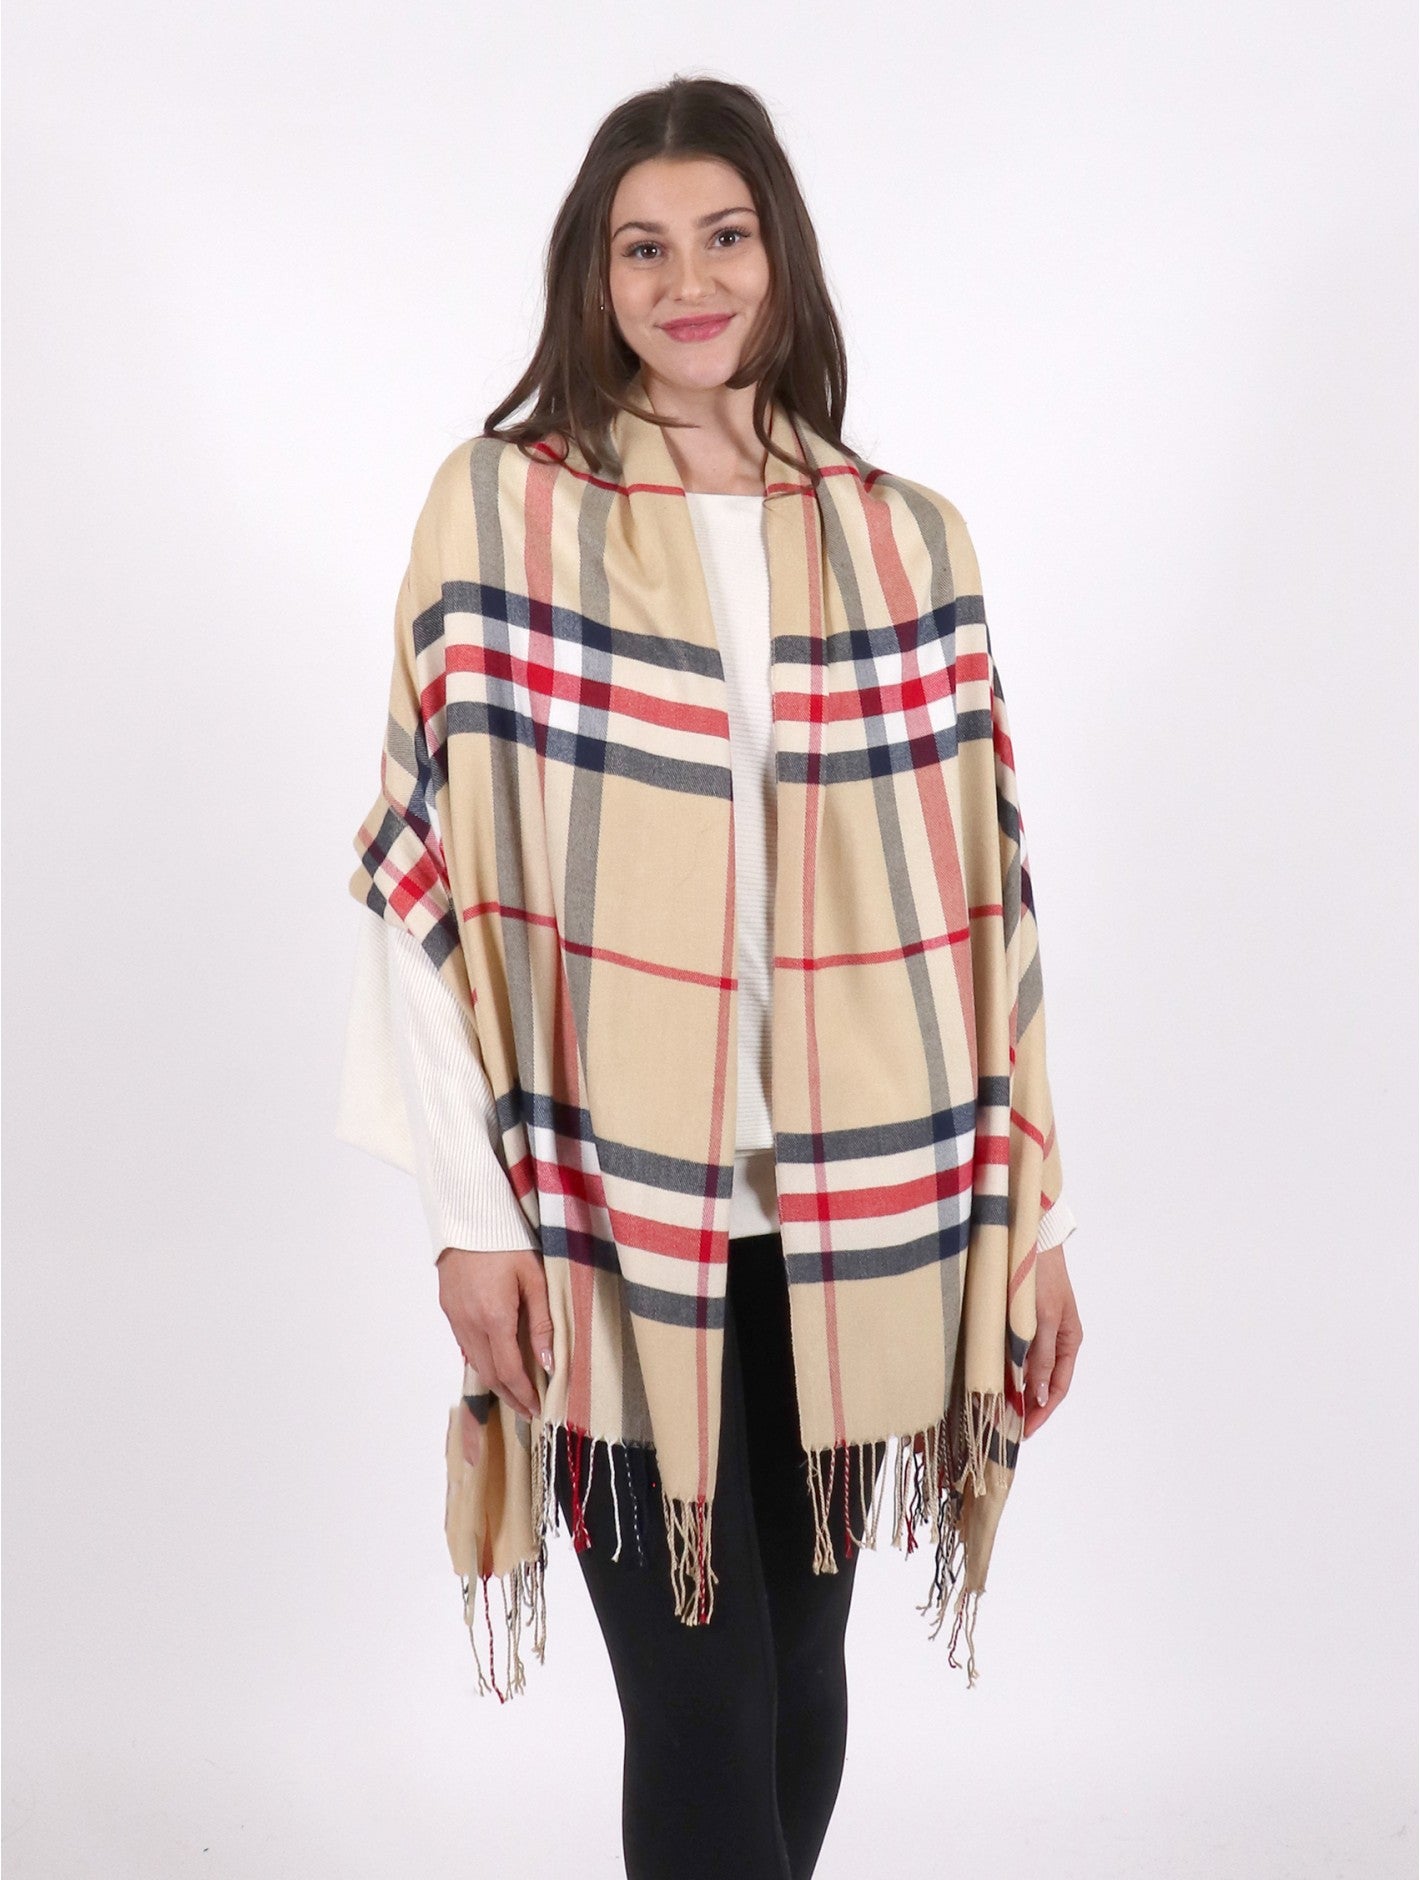 Lady wearing a beige and red plaid blanket scarf 